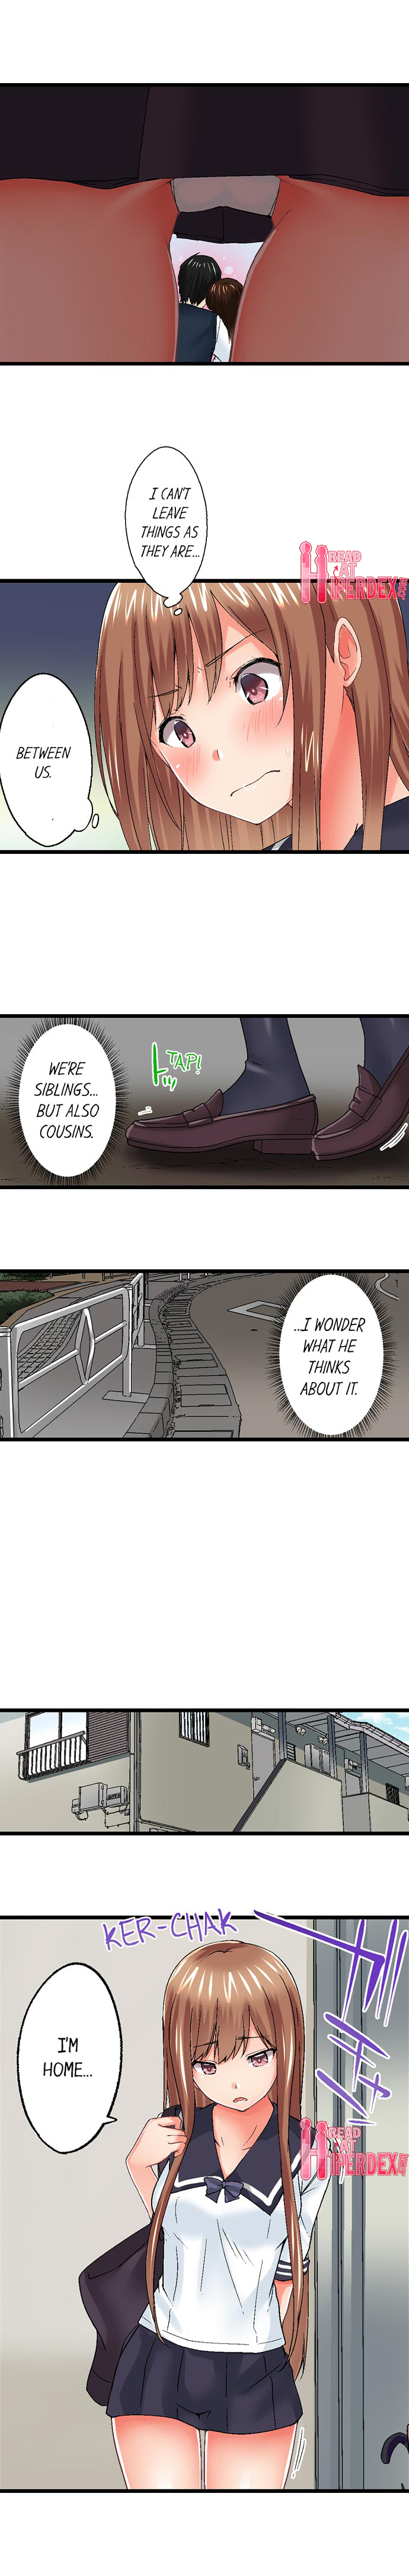 My Brother’s Slipped Inside Me in The Bathtub - Chapter 46 Page 4